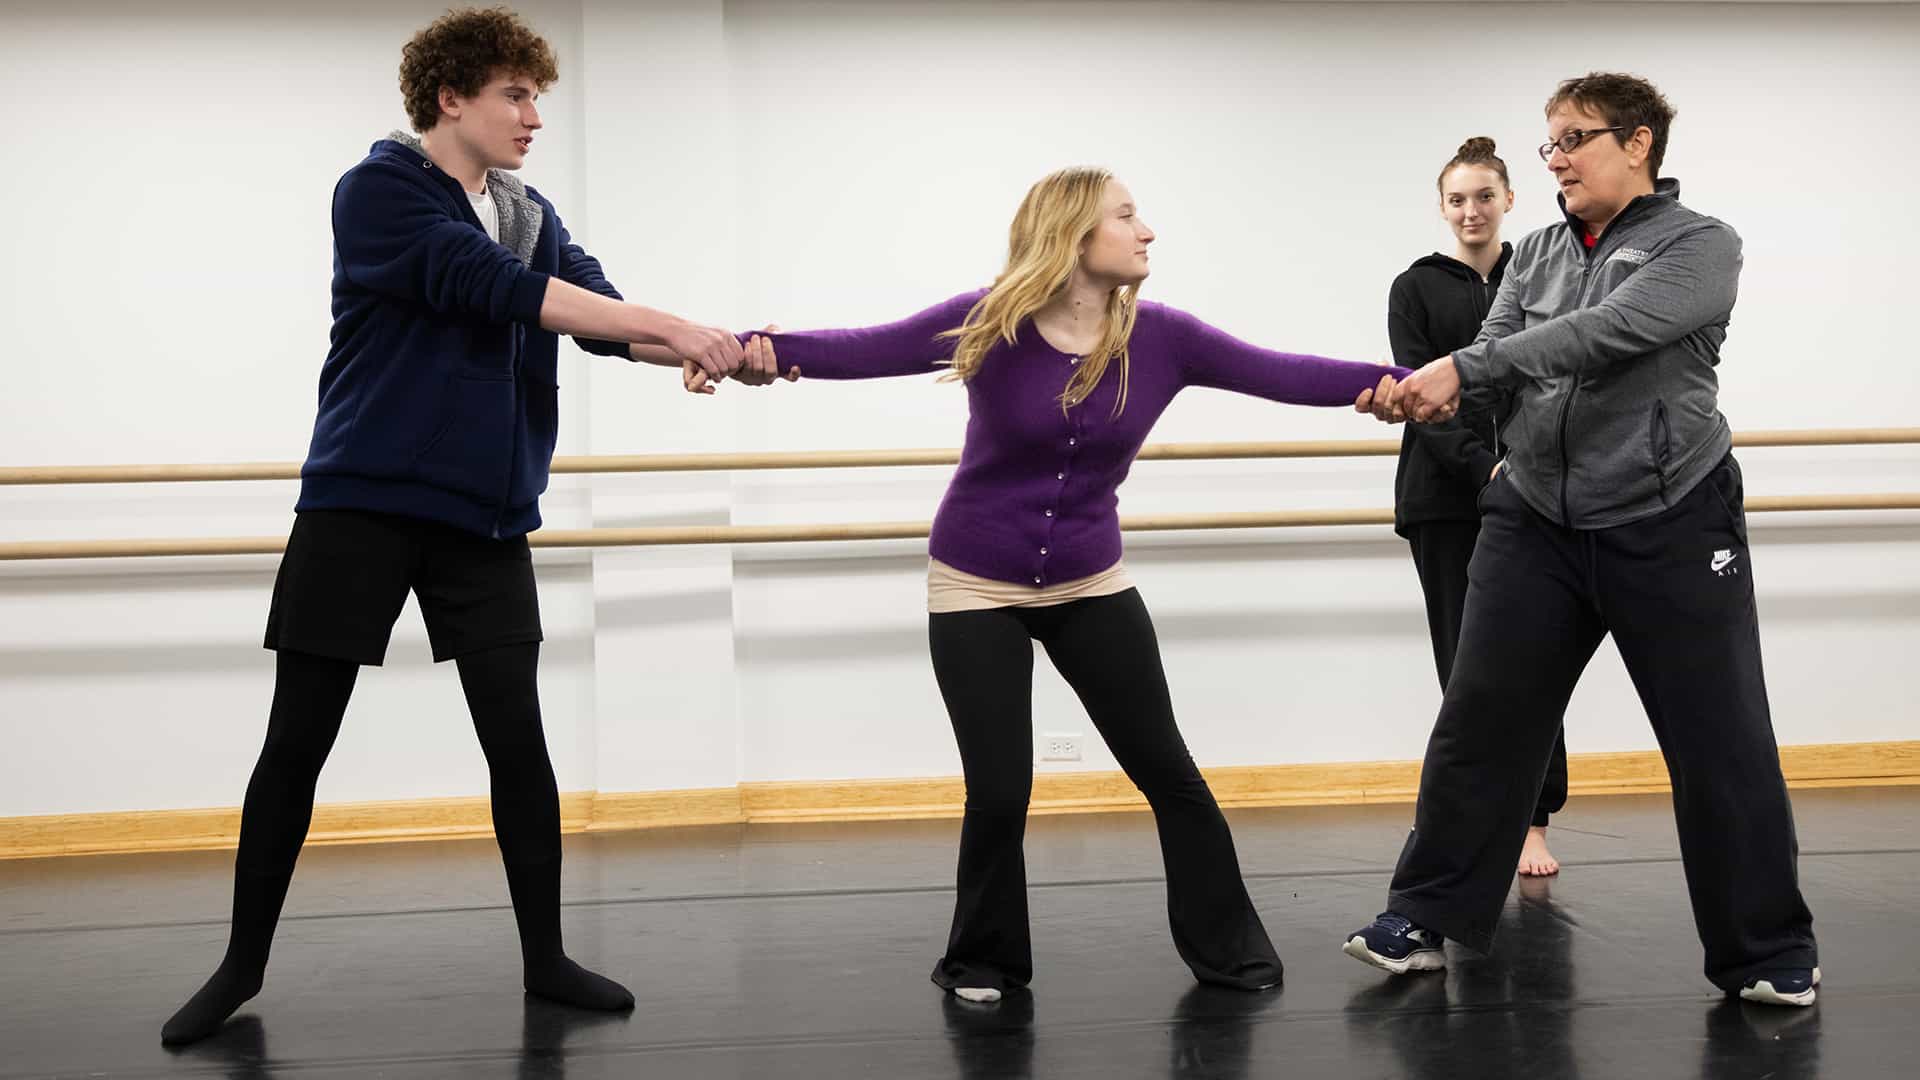 acting students in a performance class